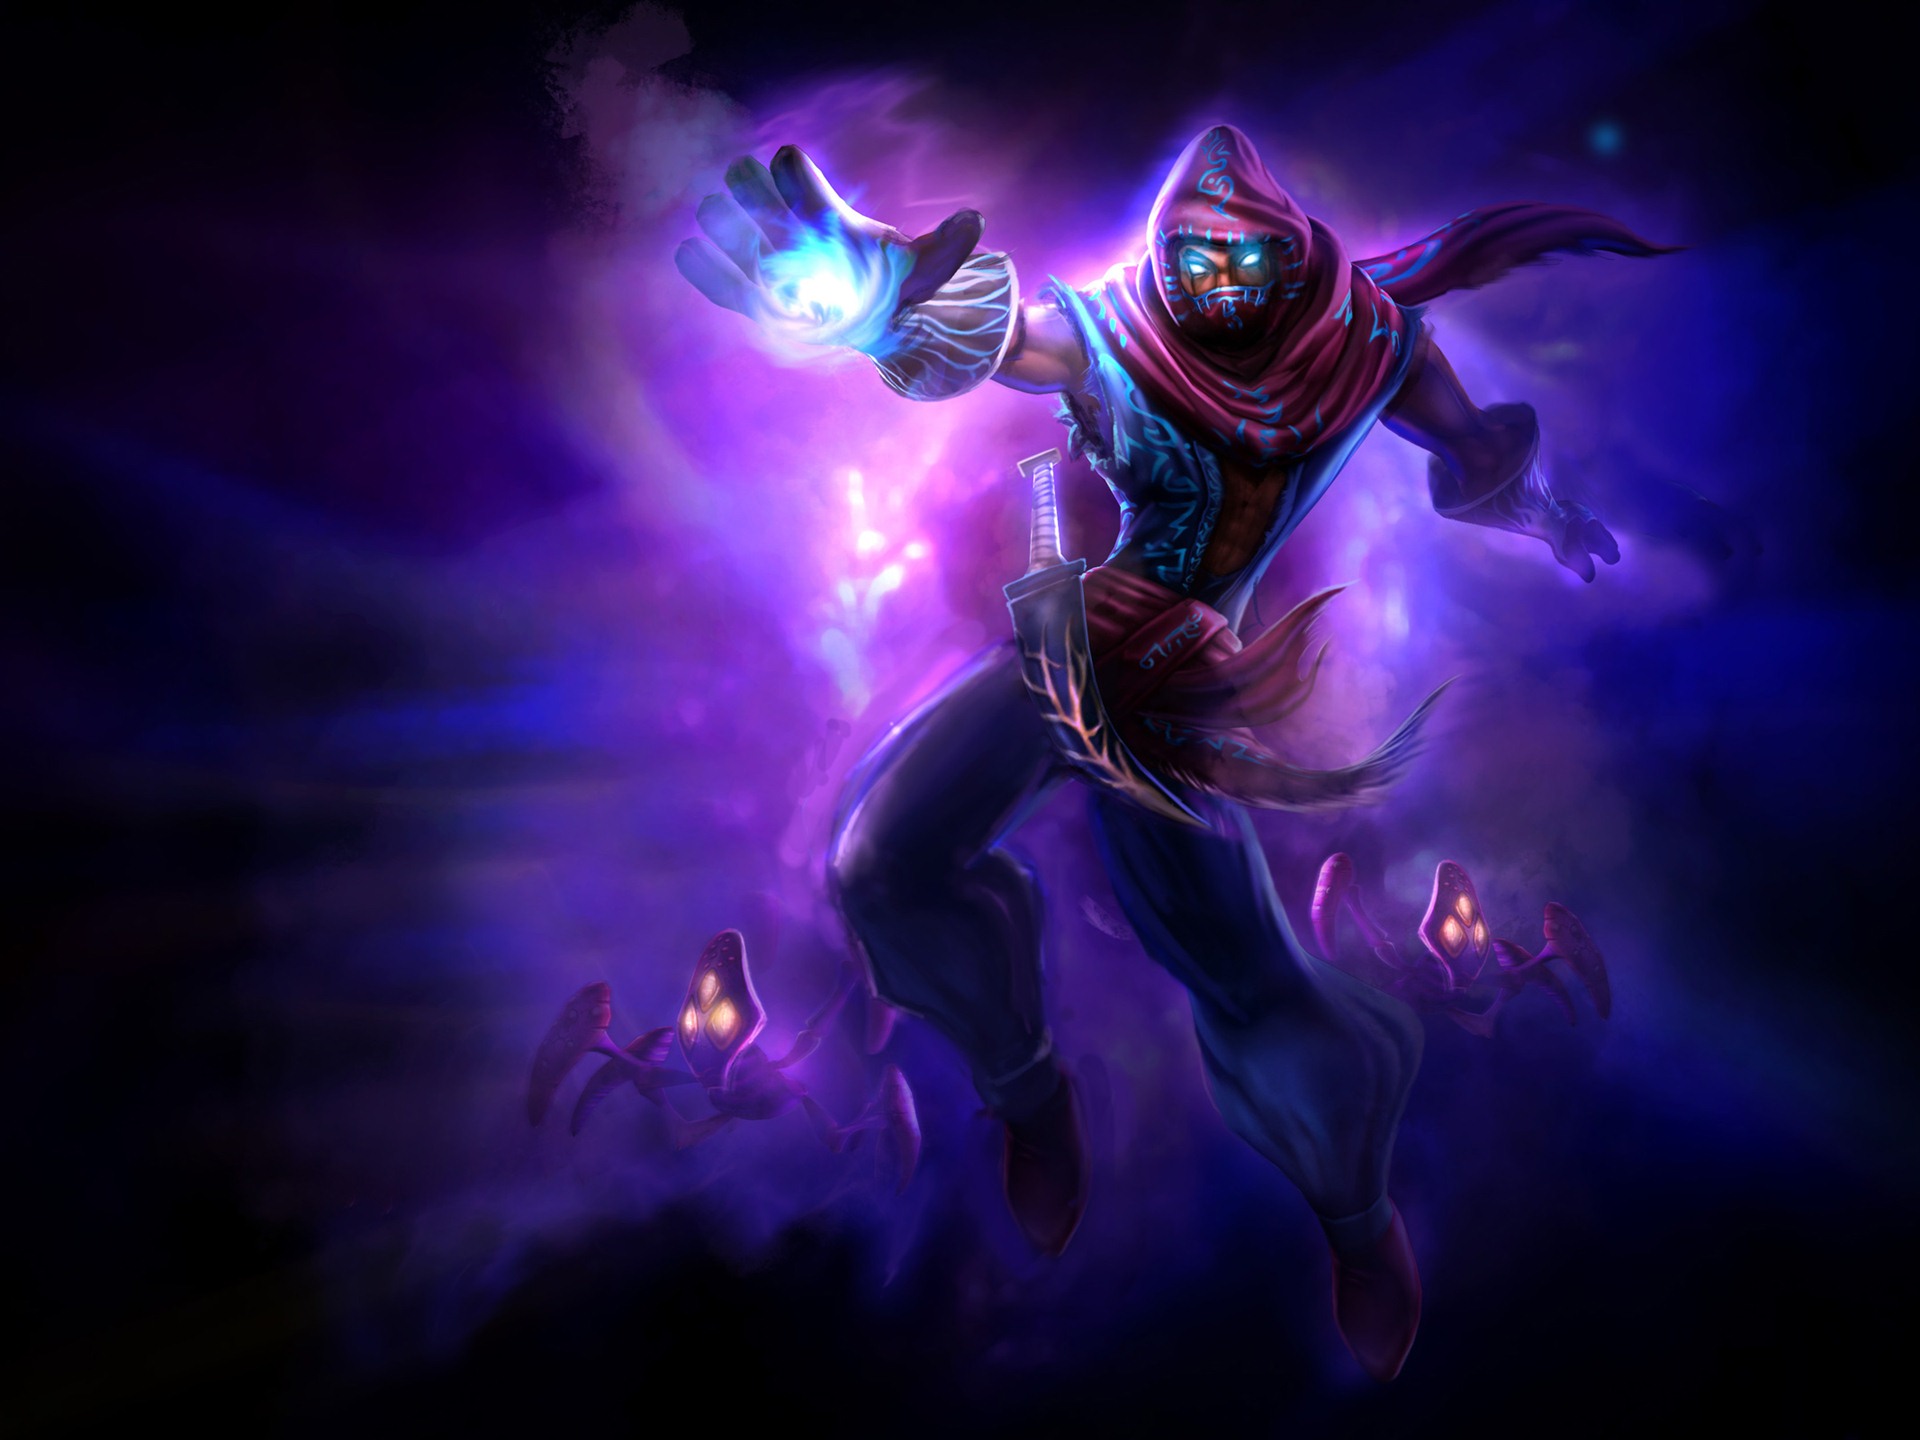 League of Legends game HD wallpapers #13 - 1920x1440